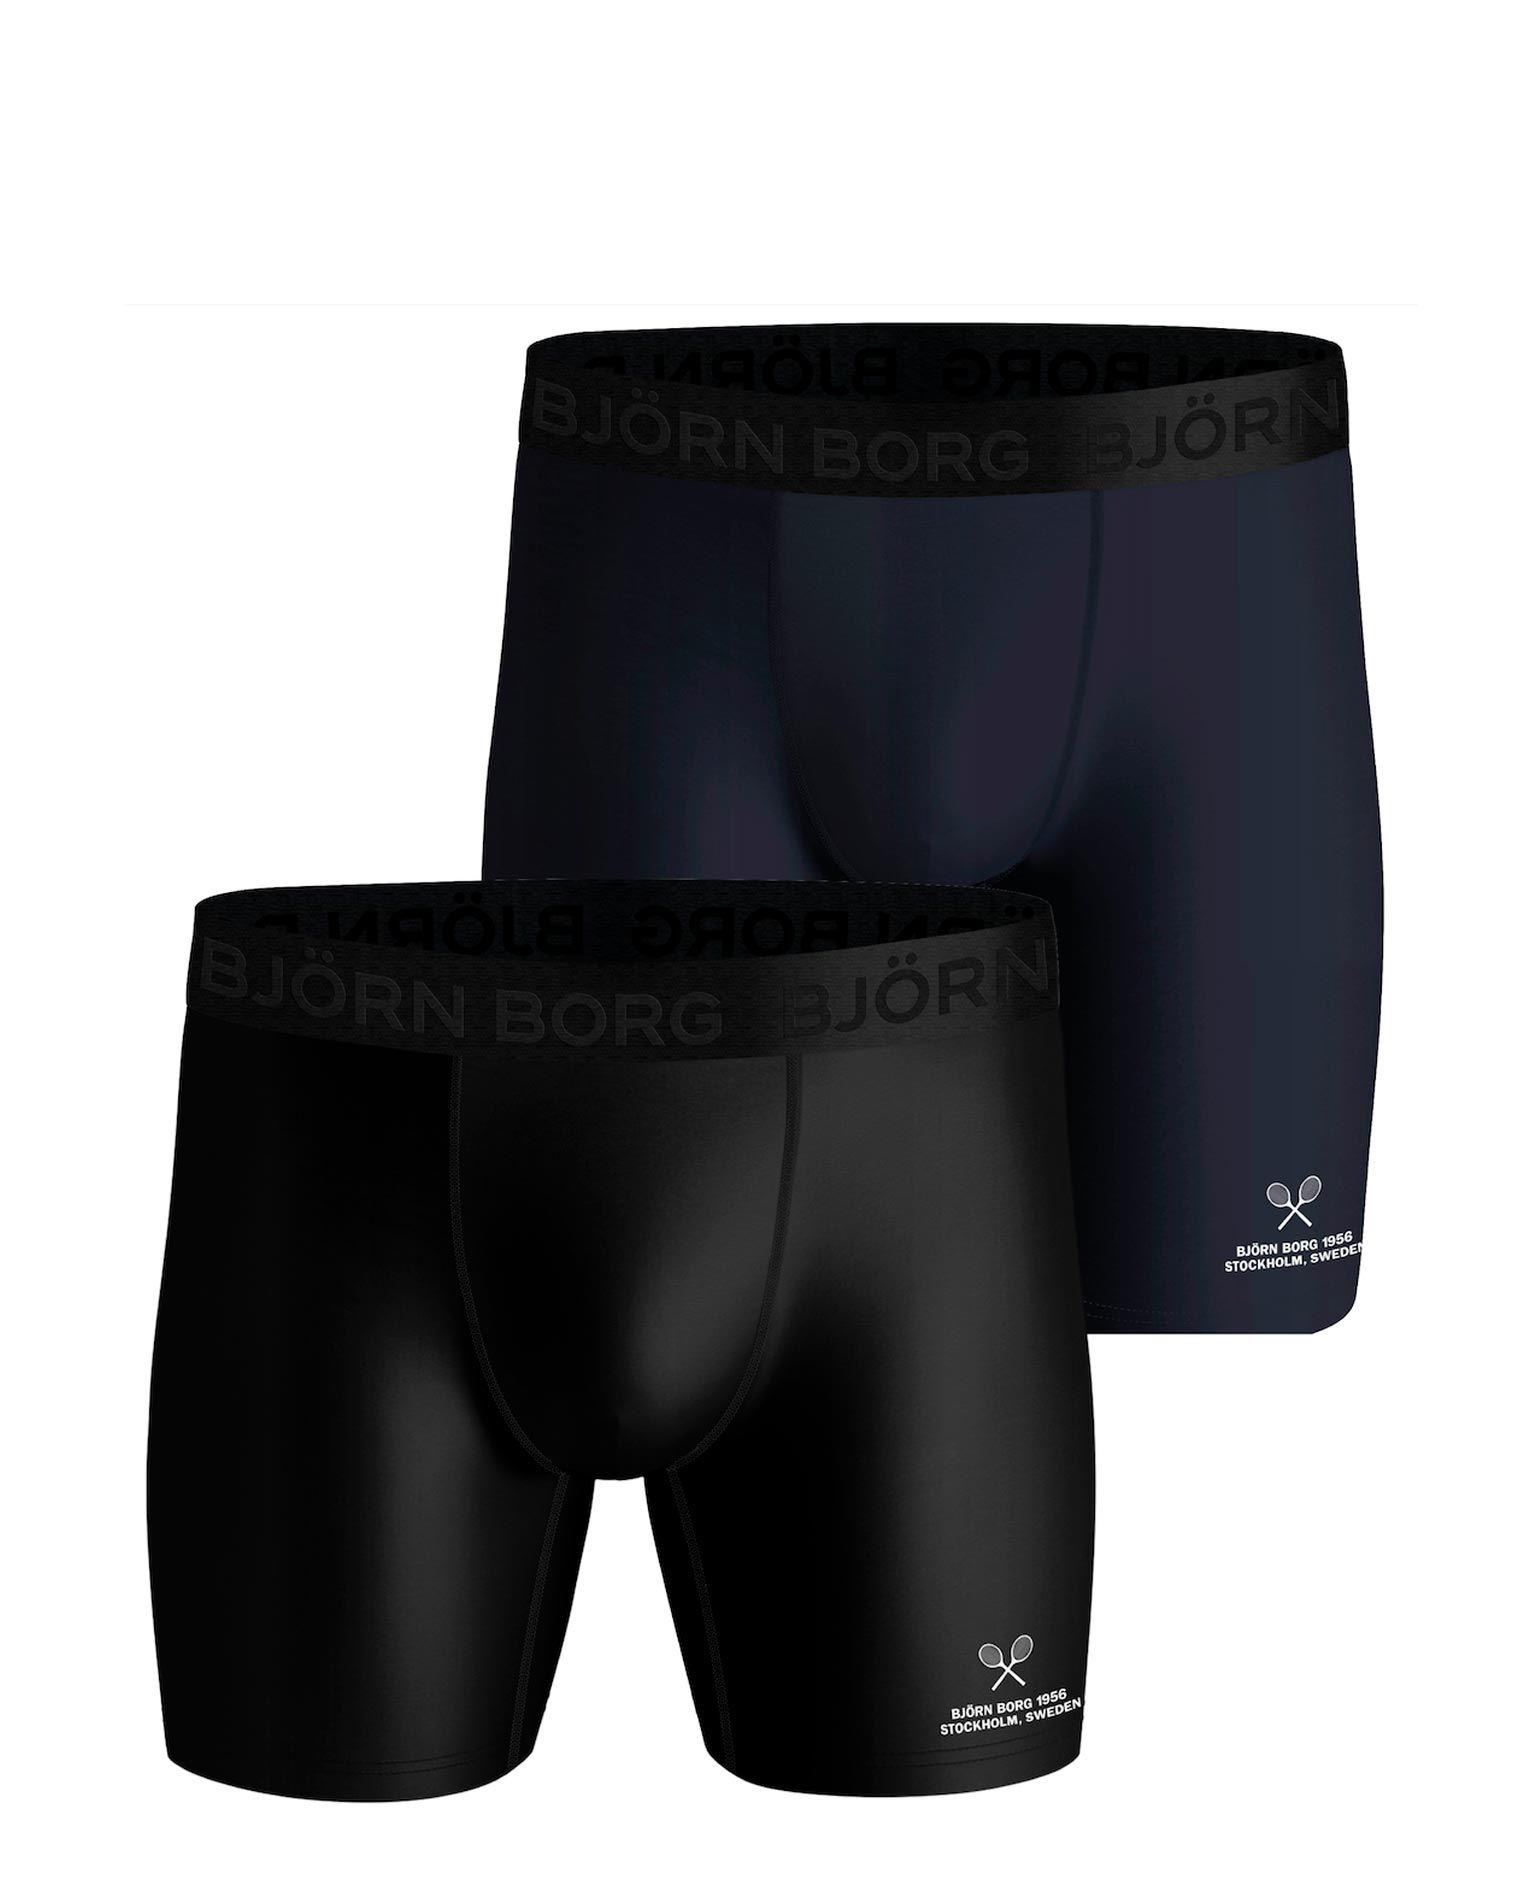 reliability announcer Credential Athletics High Function 2Pack Boxers Björn Borg - 1157 - Alusvaatteet -  Jerone.fi